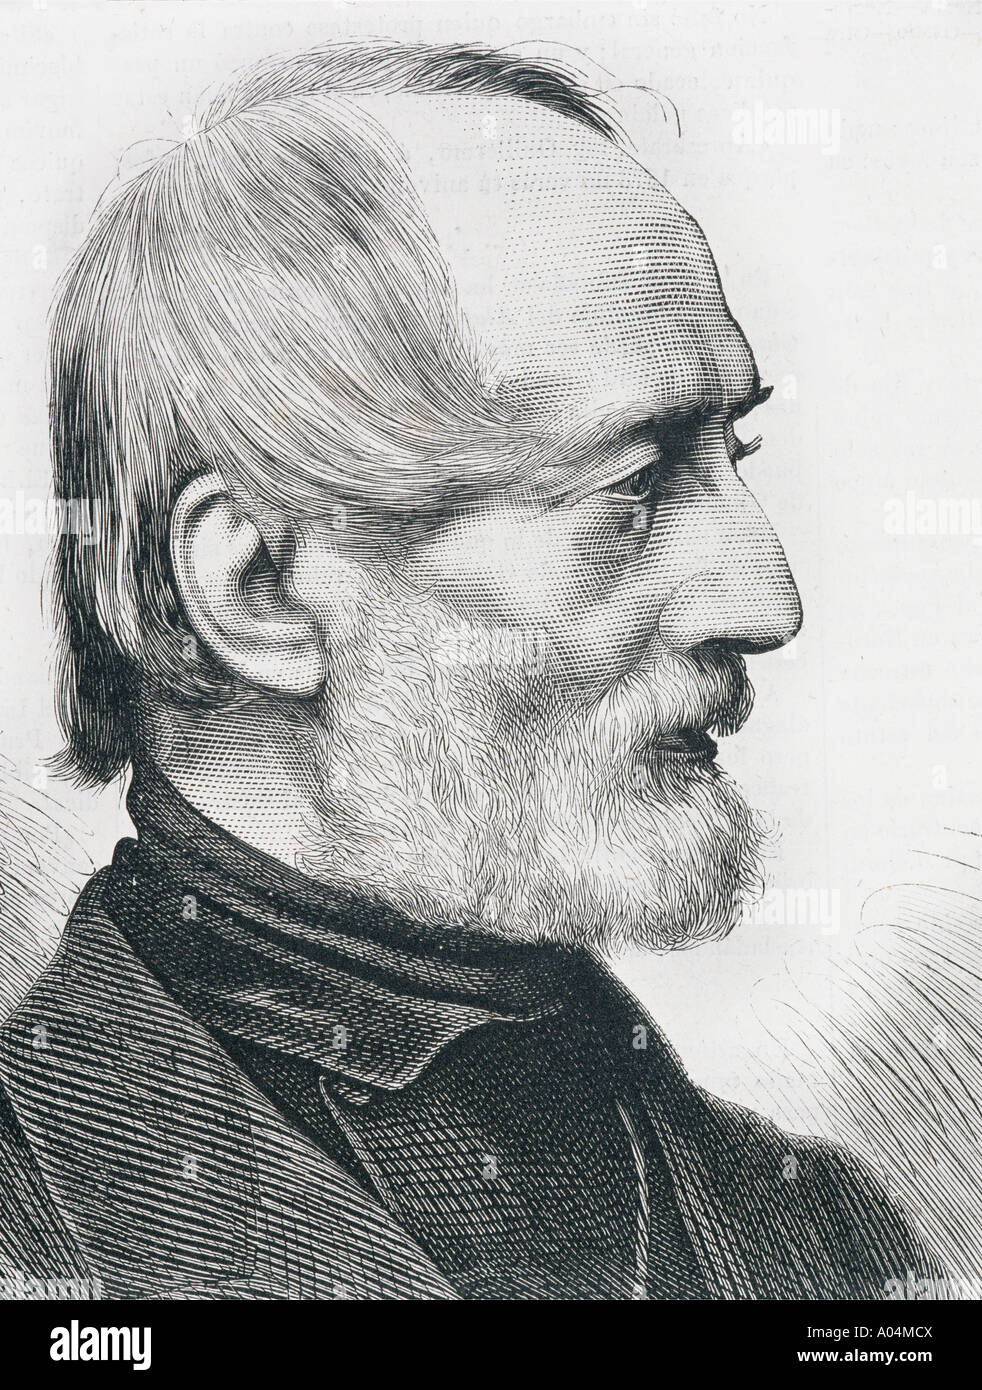 Giuseppe Mazzini, 1805 -1872. Italian writer, patriot and political thinker. From a 19th century engraving. Stock Photo